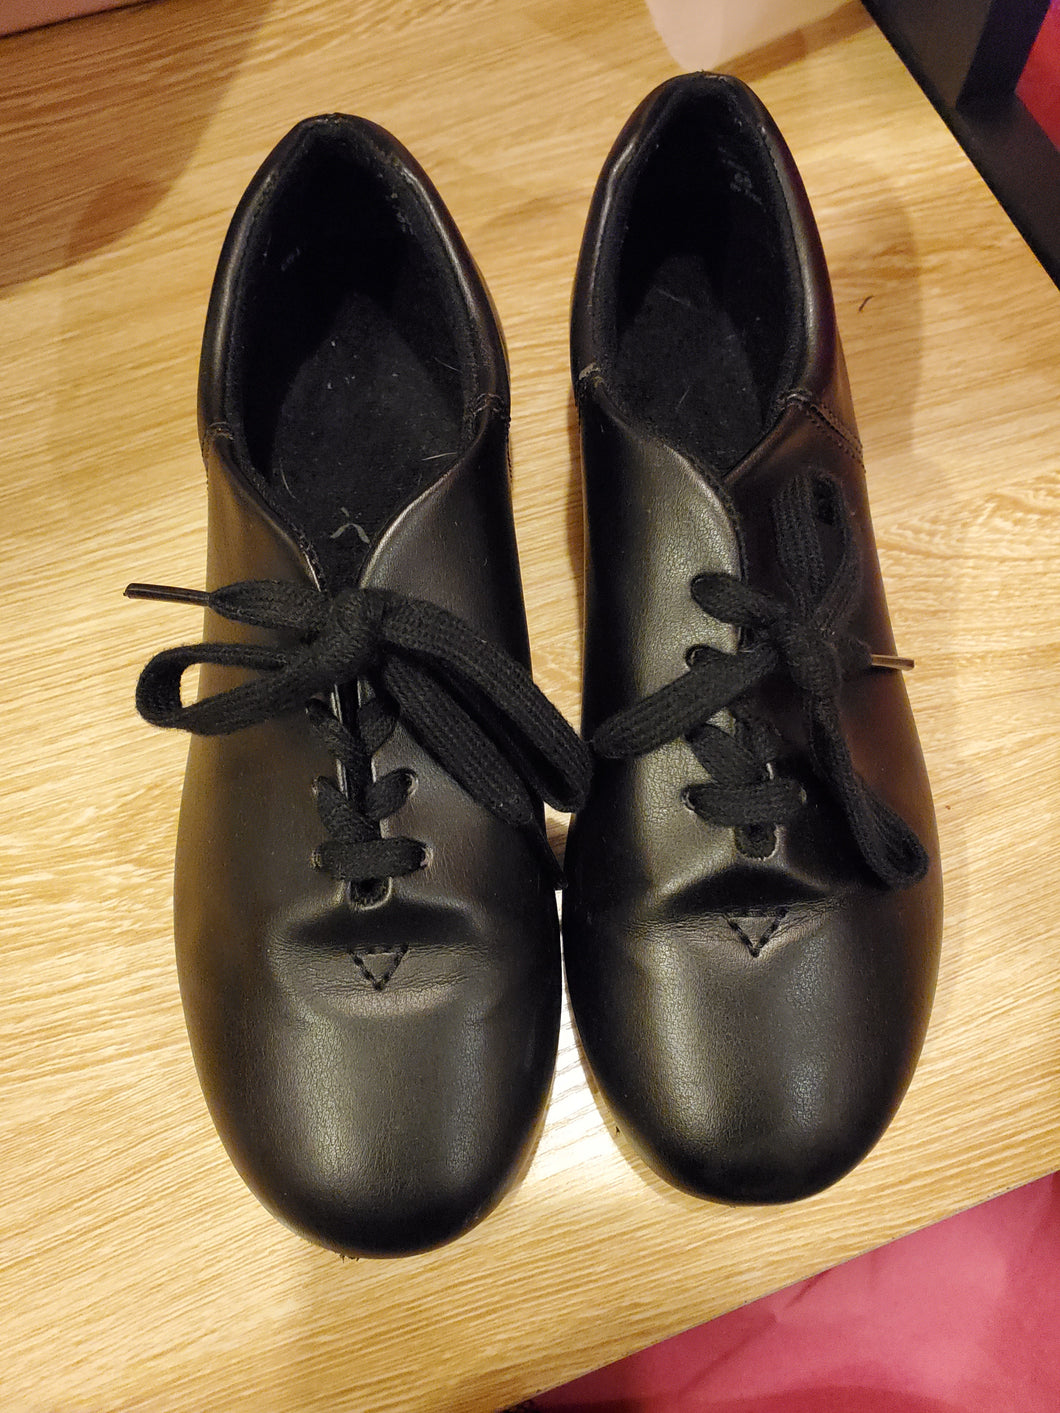 Consignment - cadence tap shoe size 2